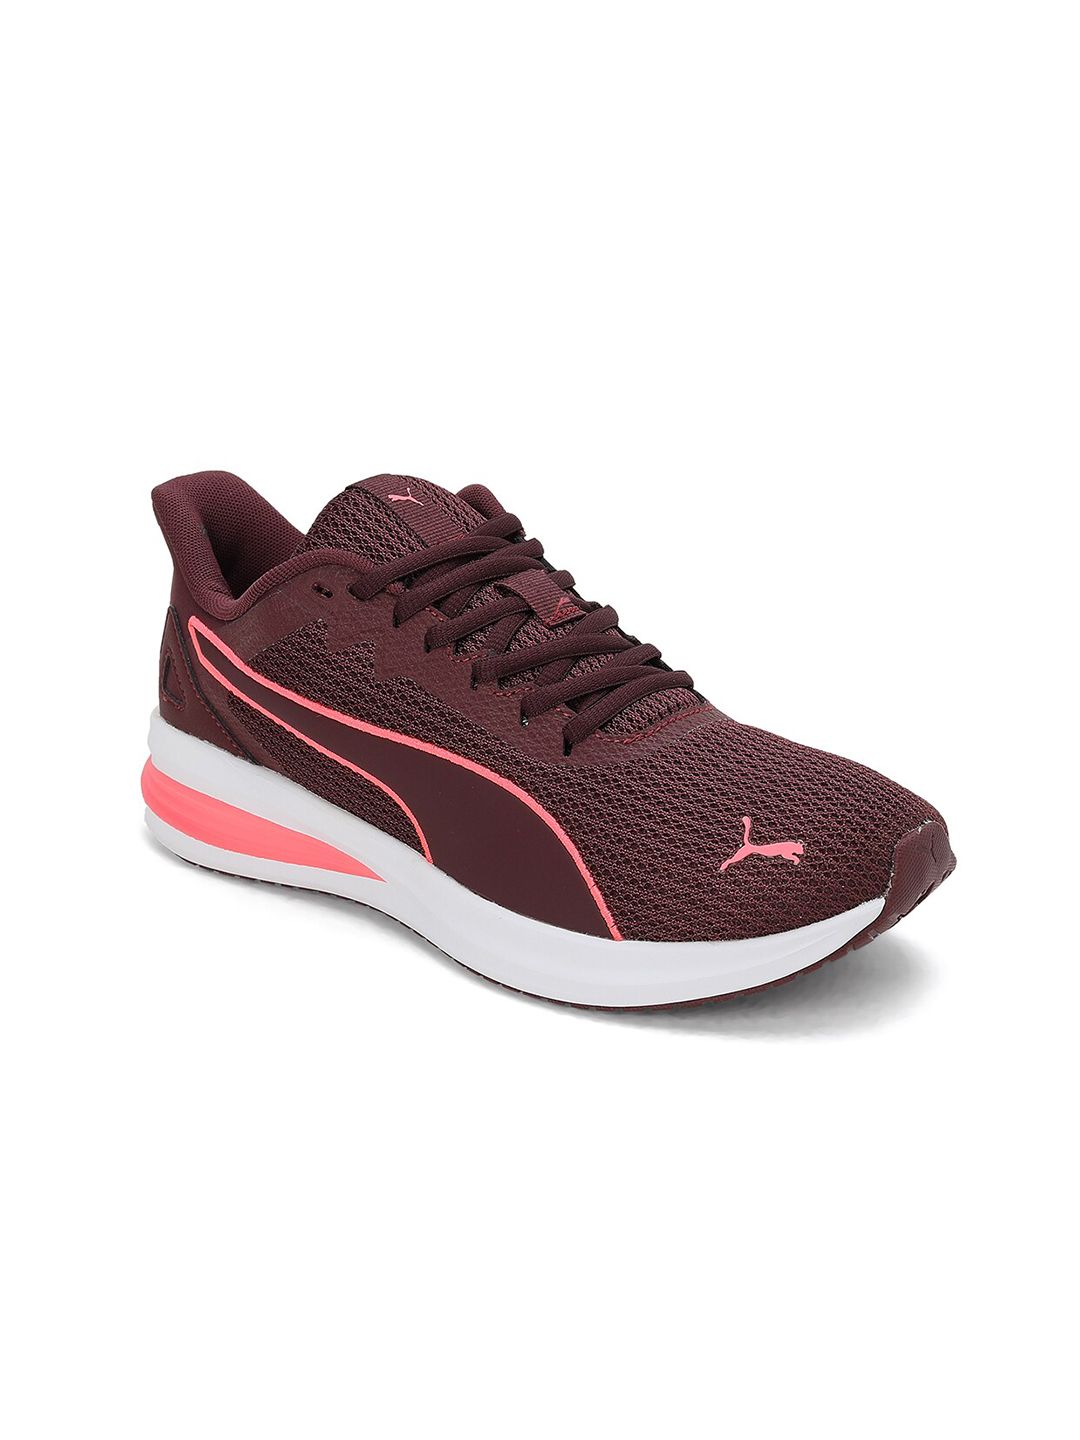 Puma Purple Textile Transport Modern Running Shoes Price in India